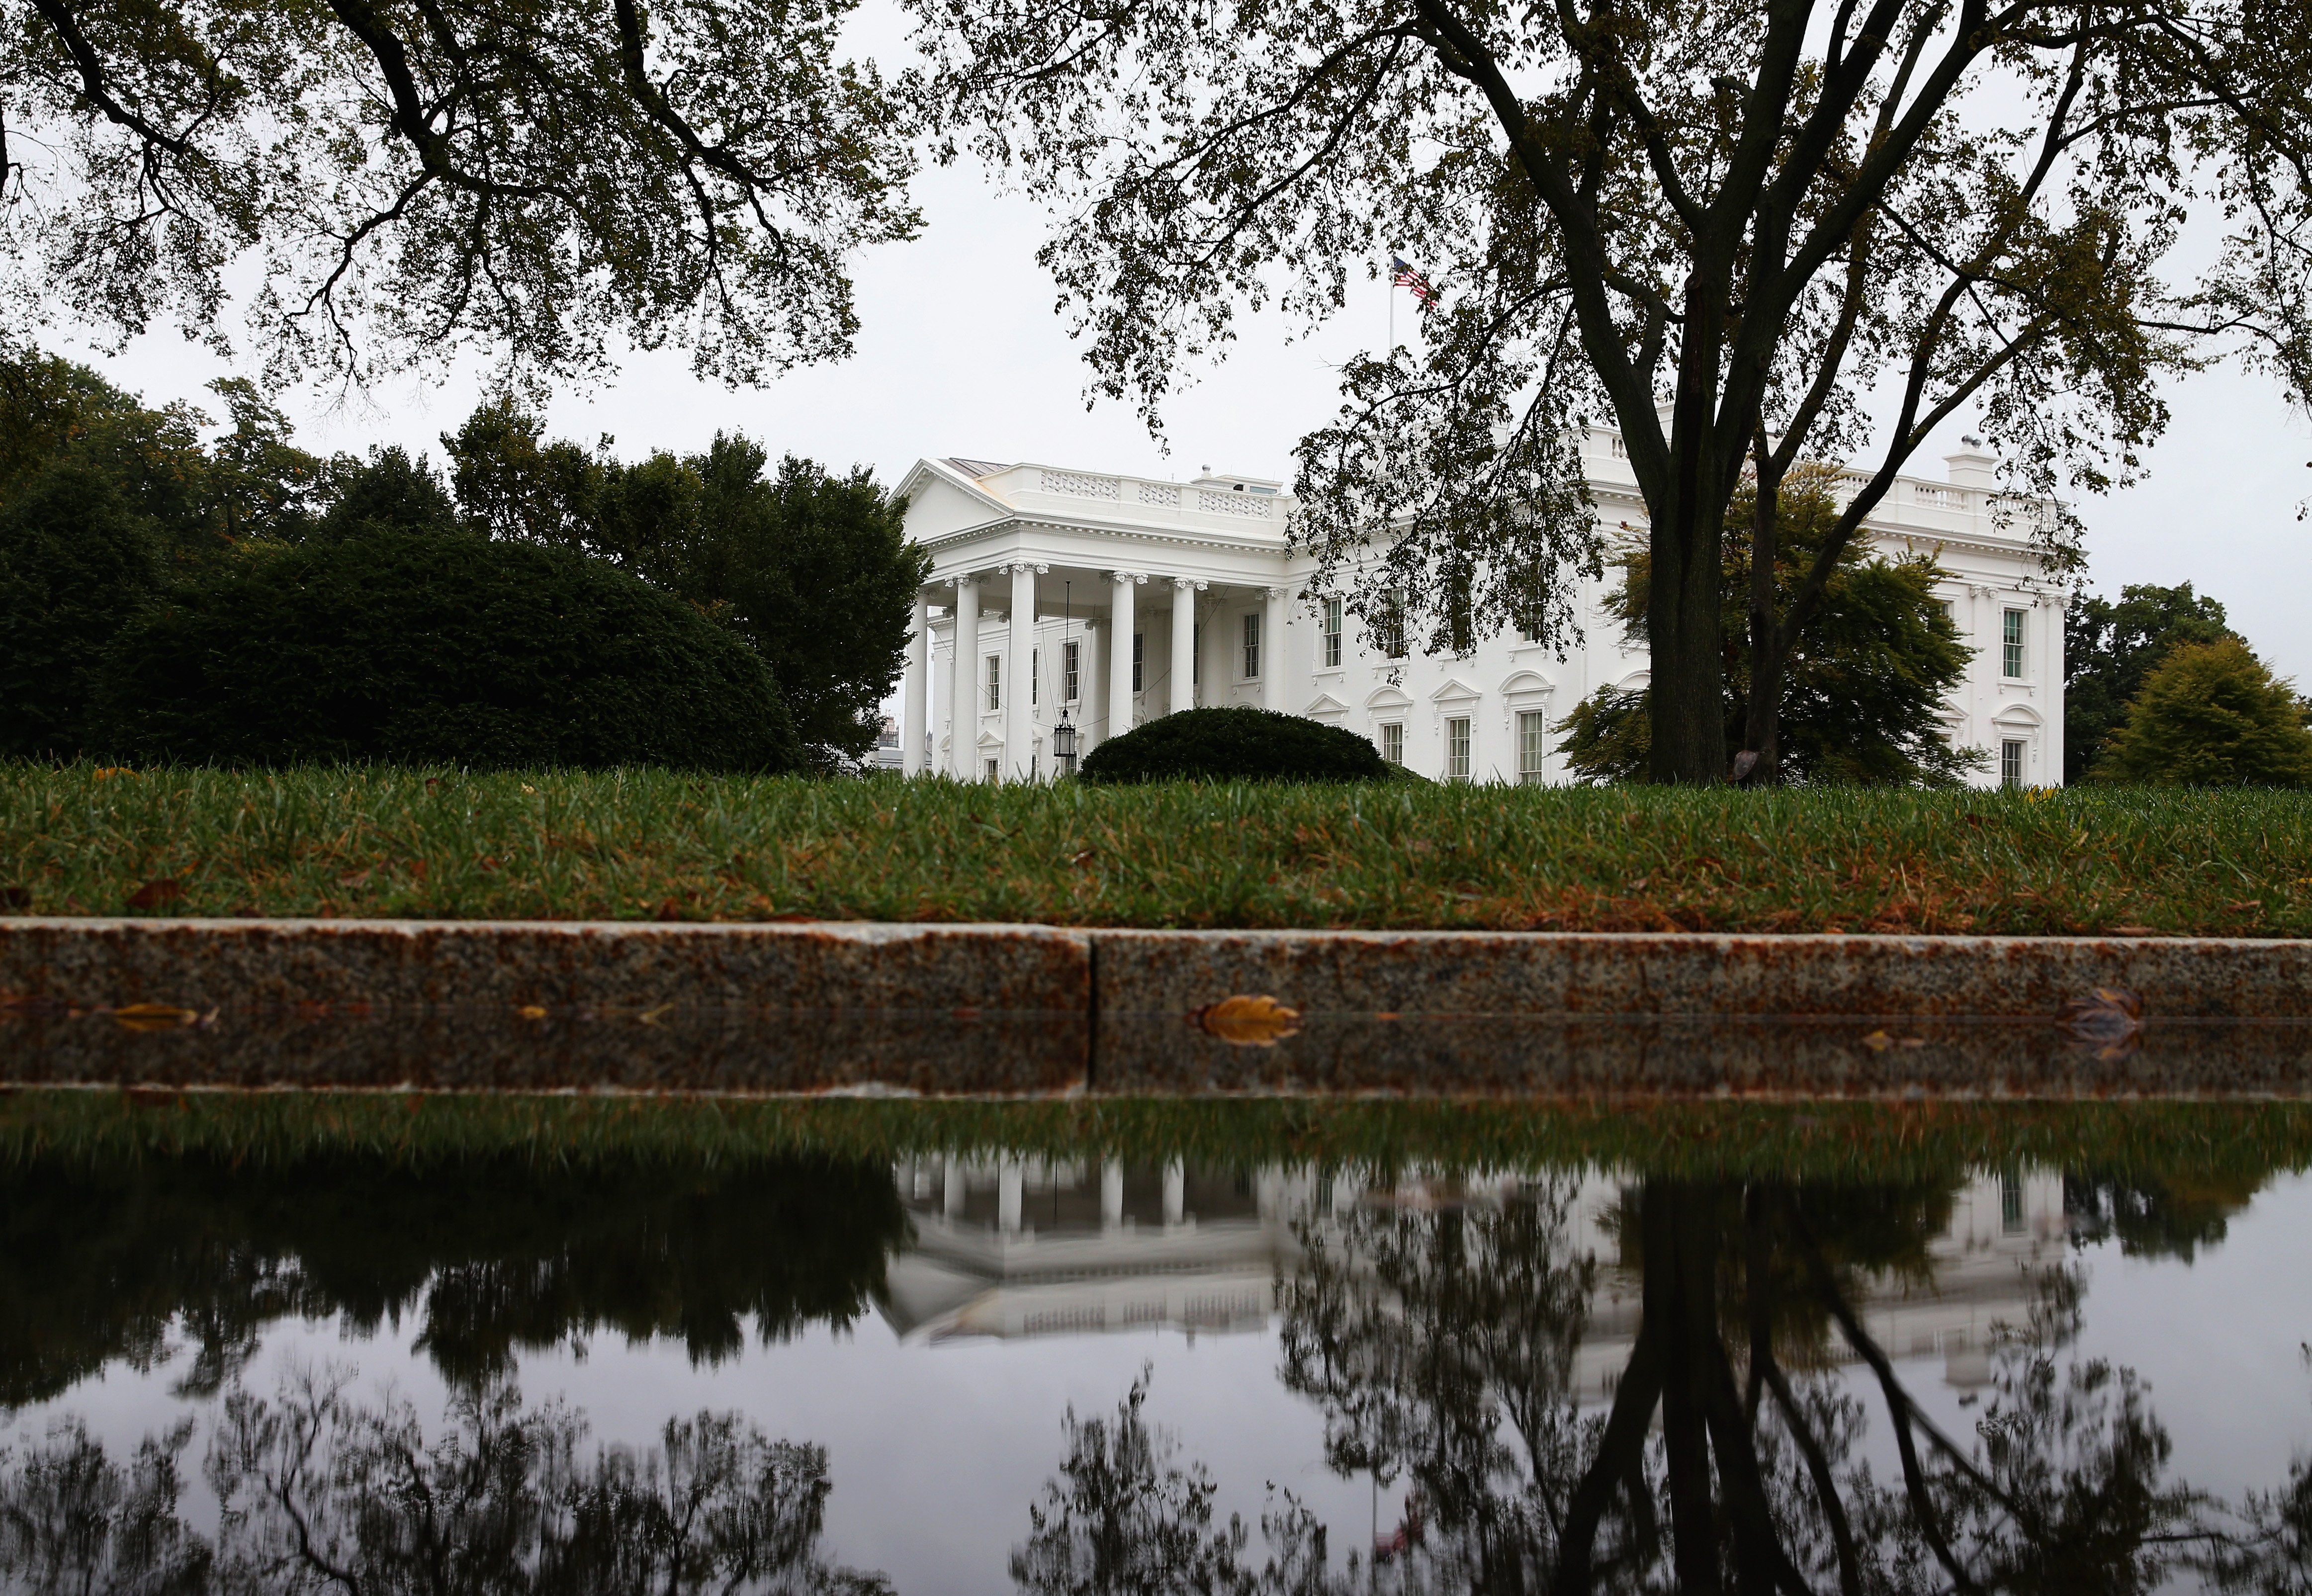 The White House Is Reflected On Driveway Puddle